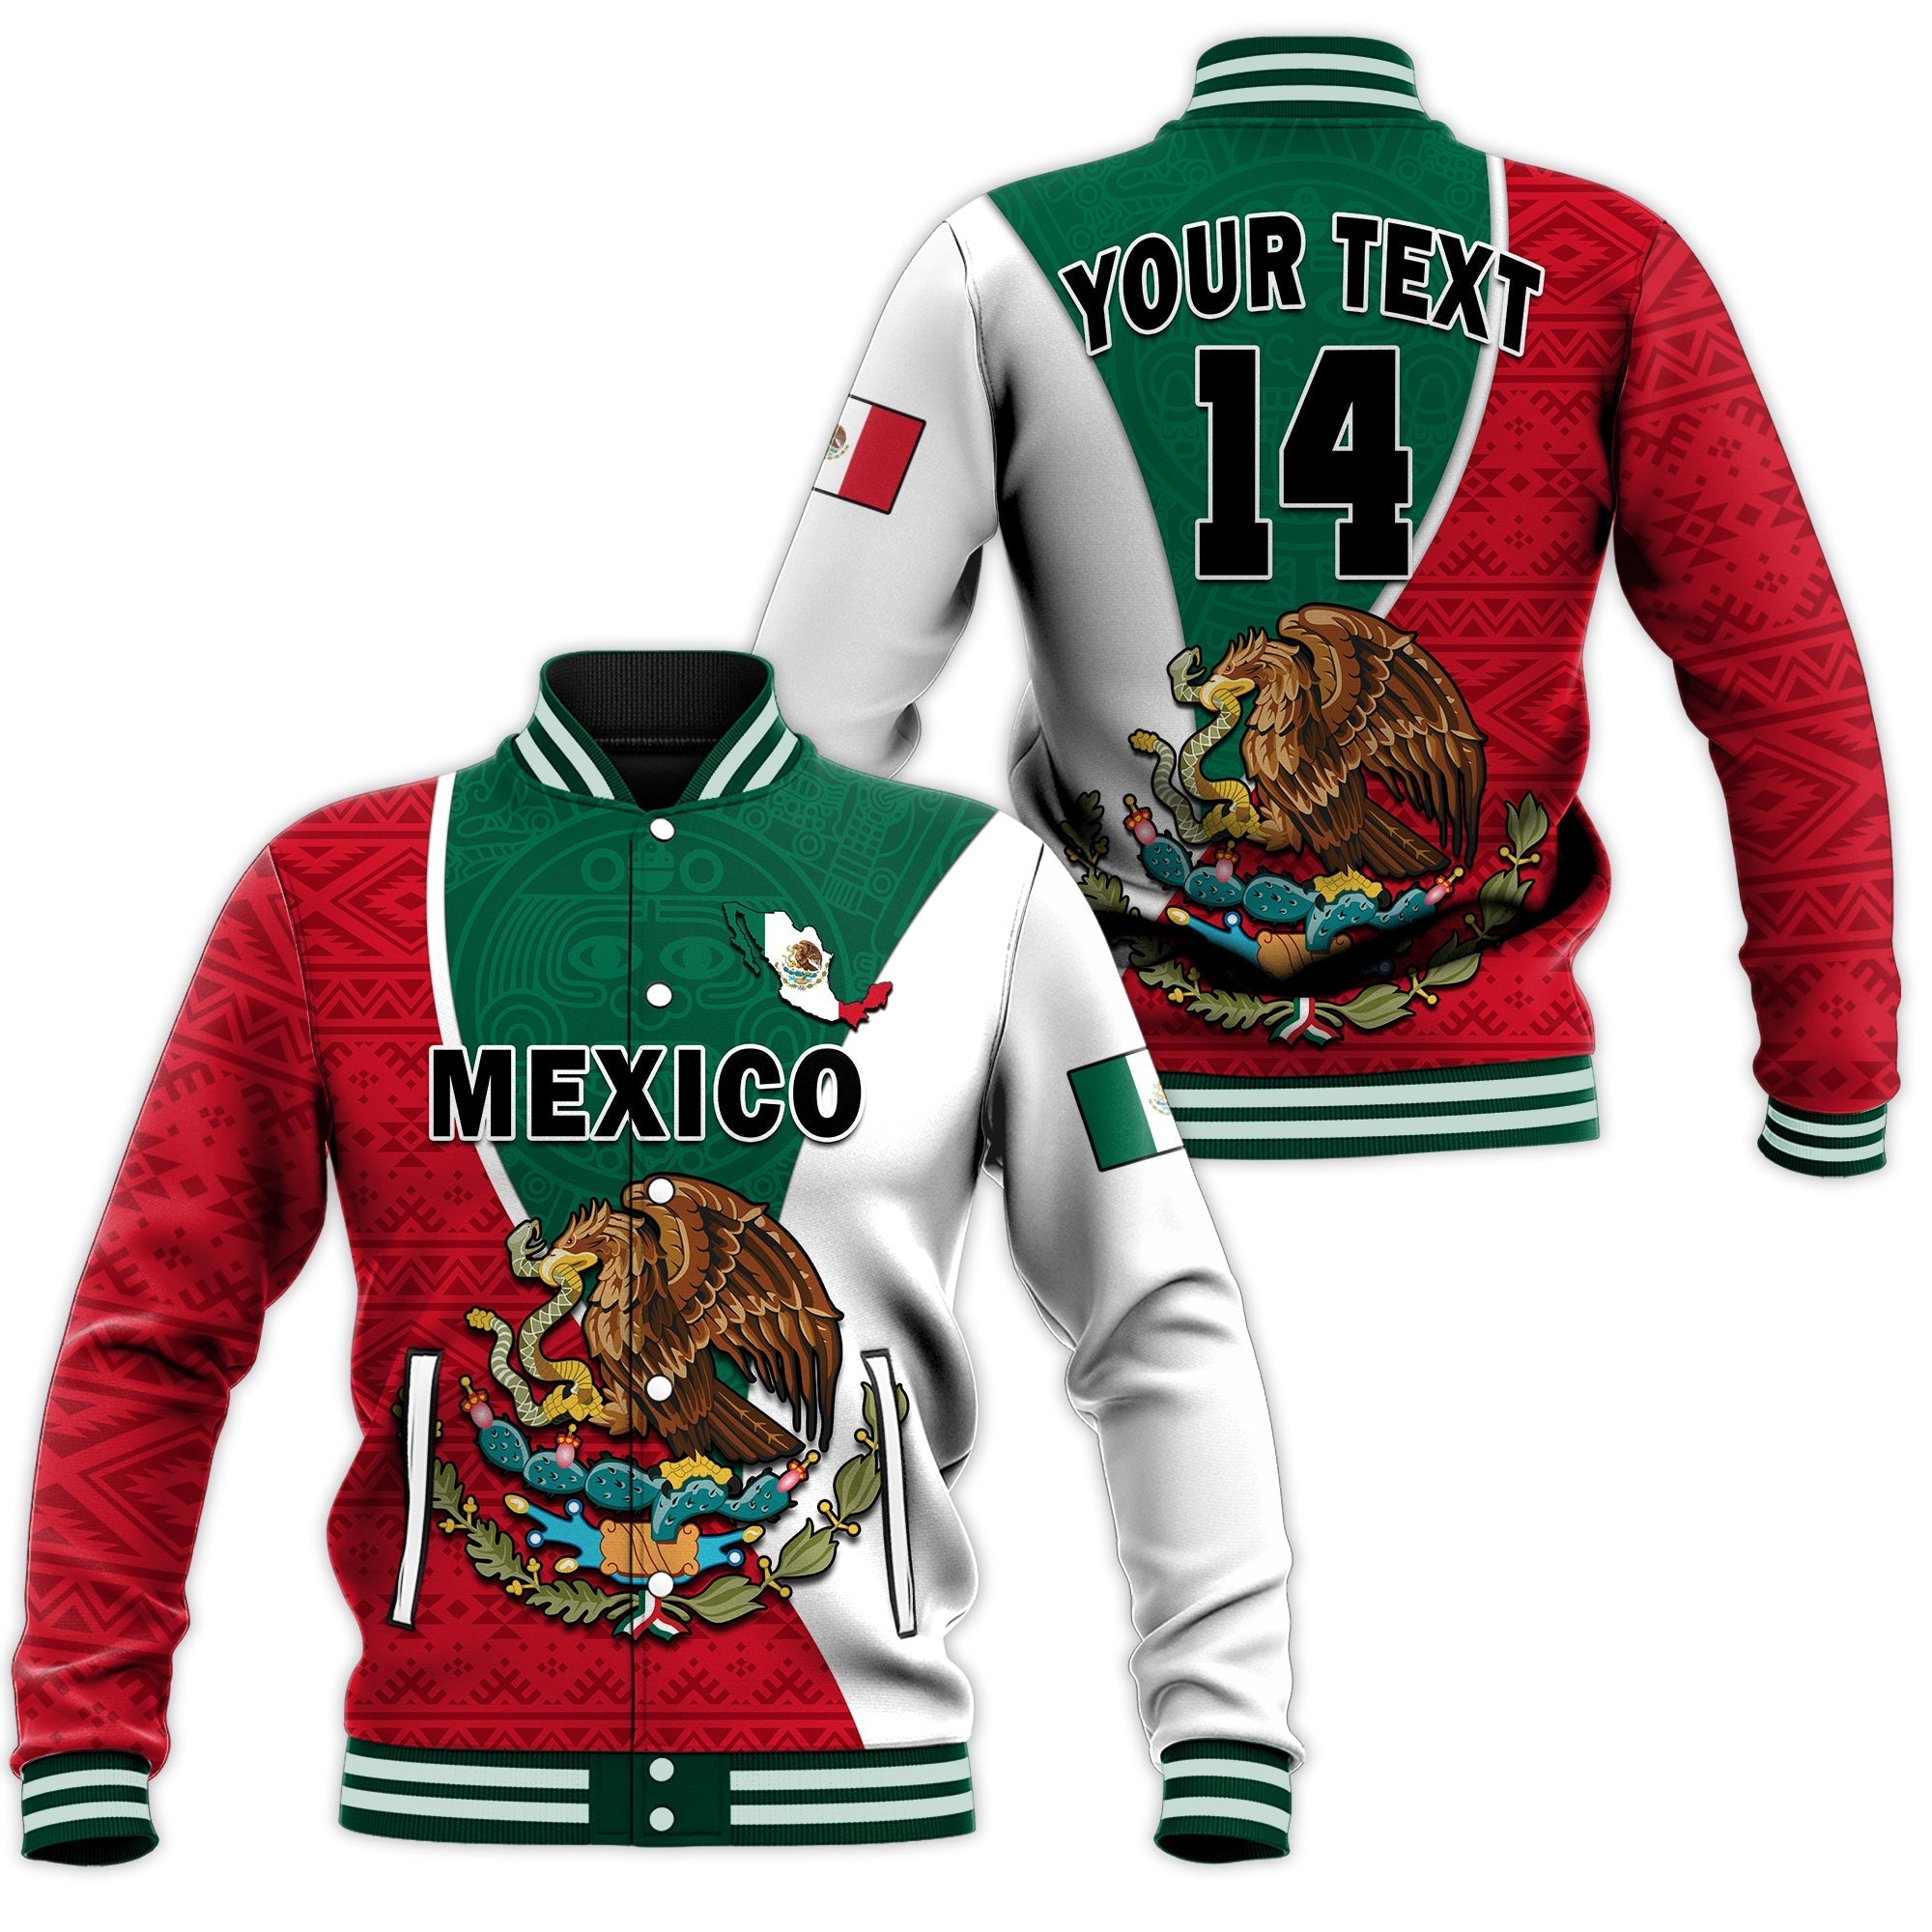 custom-text-and-number-mexico-baseball-jacket-mexican-aztec-pattern